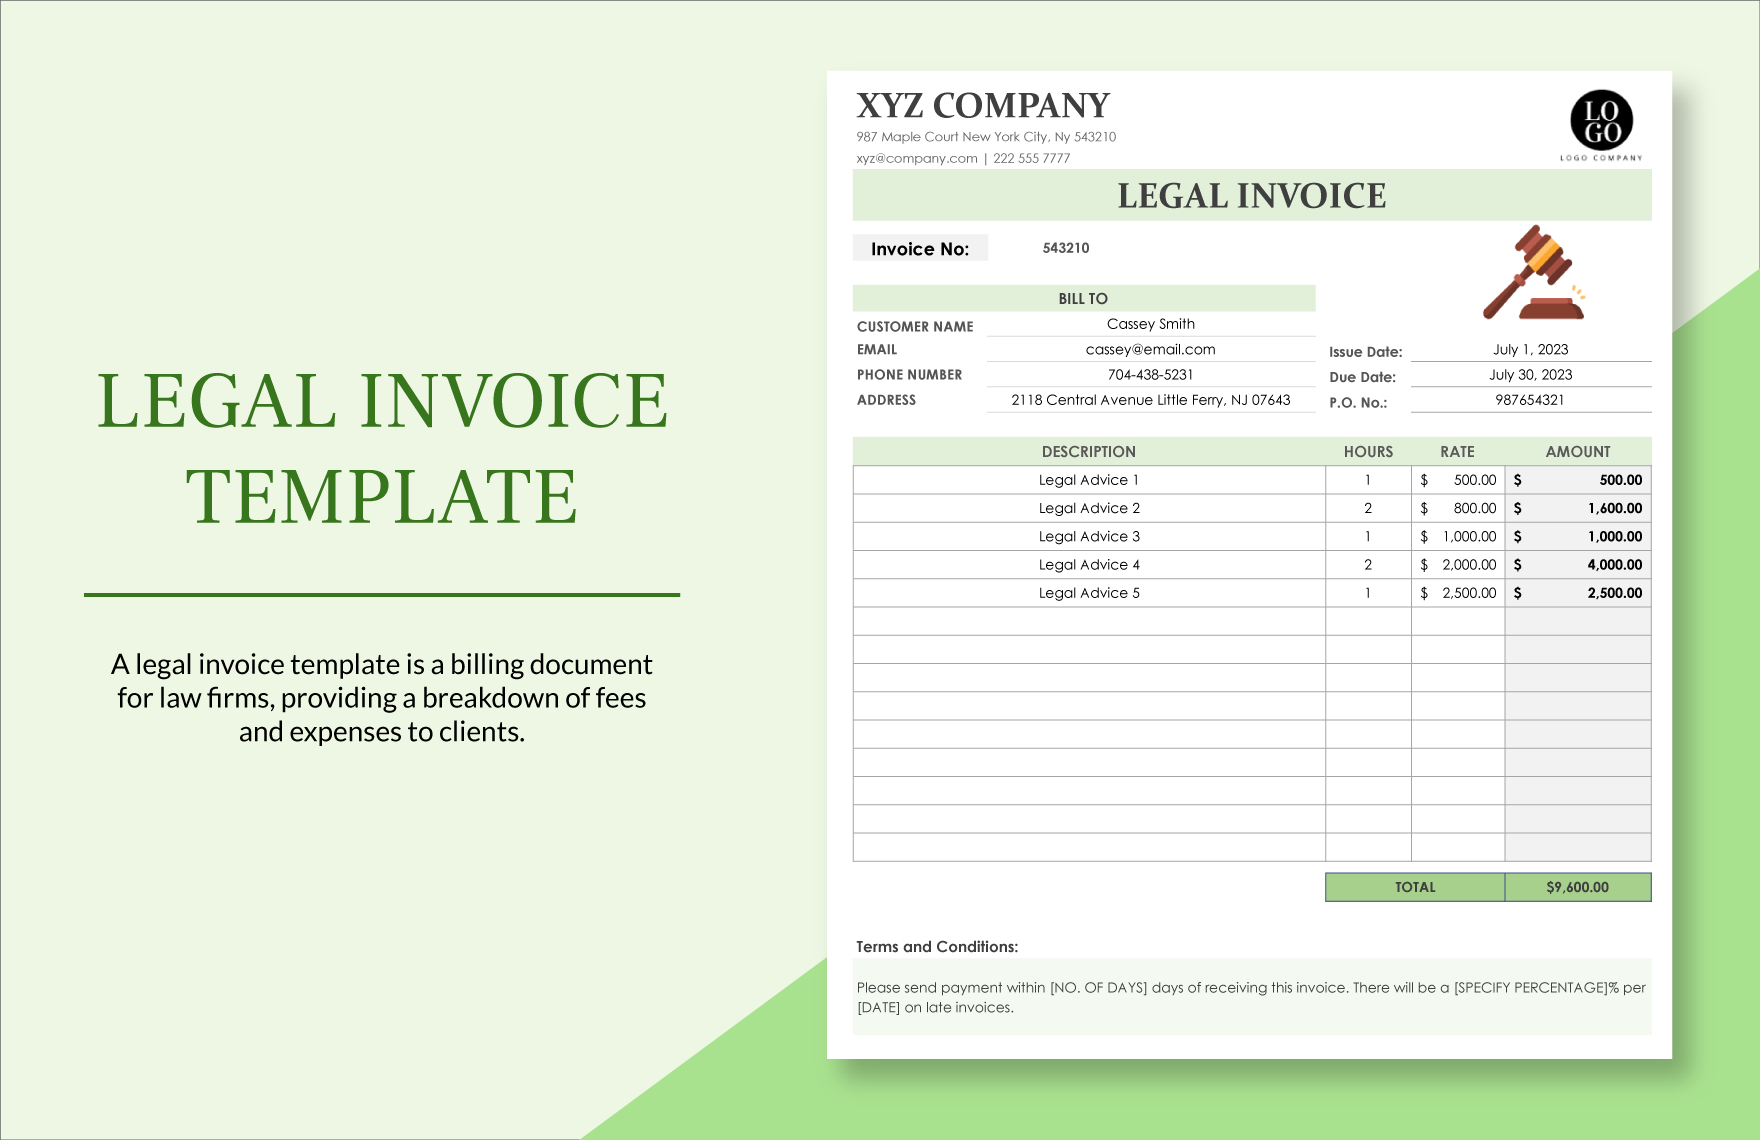 Legal Invoice Template